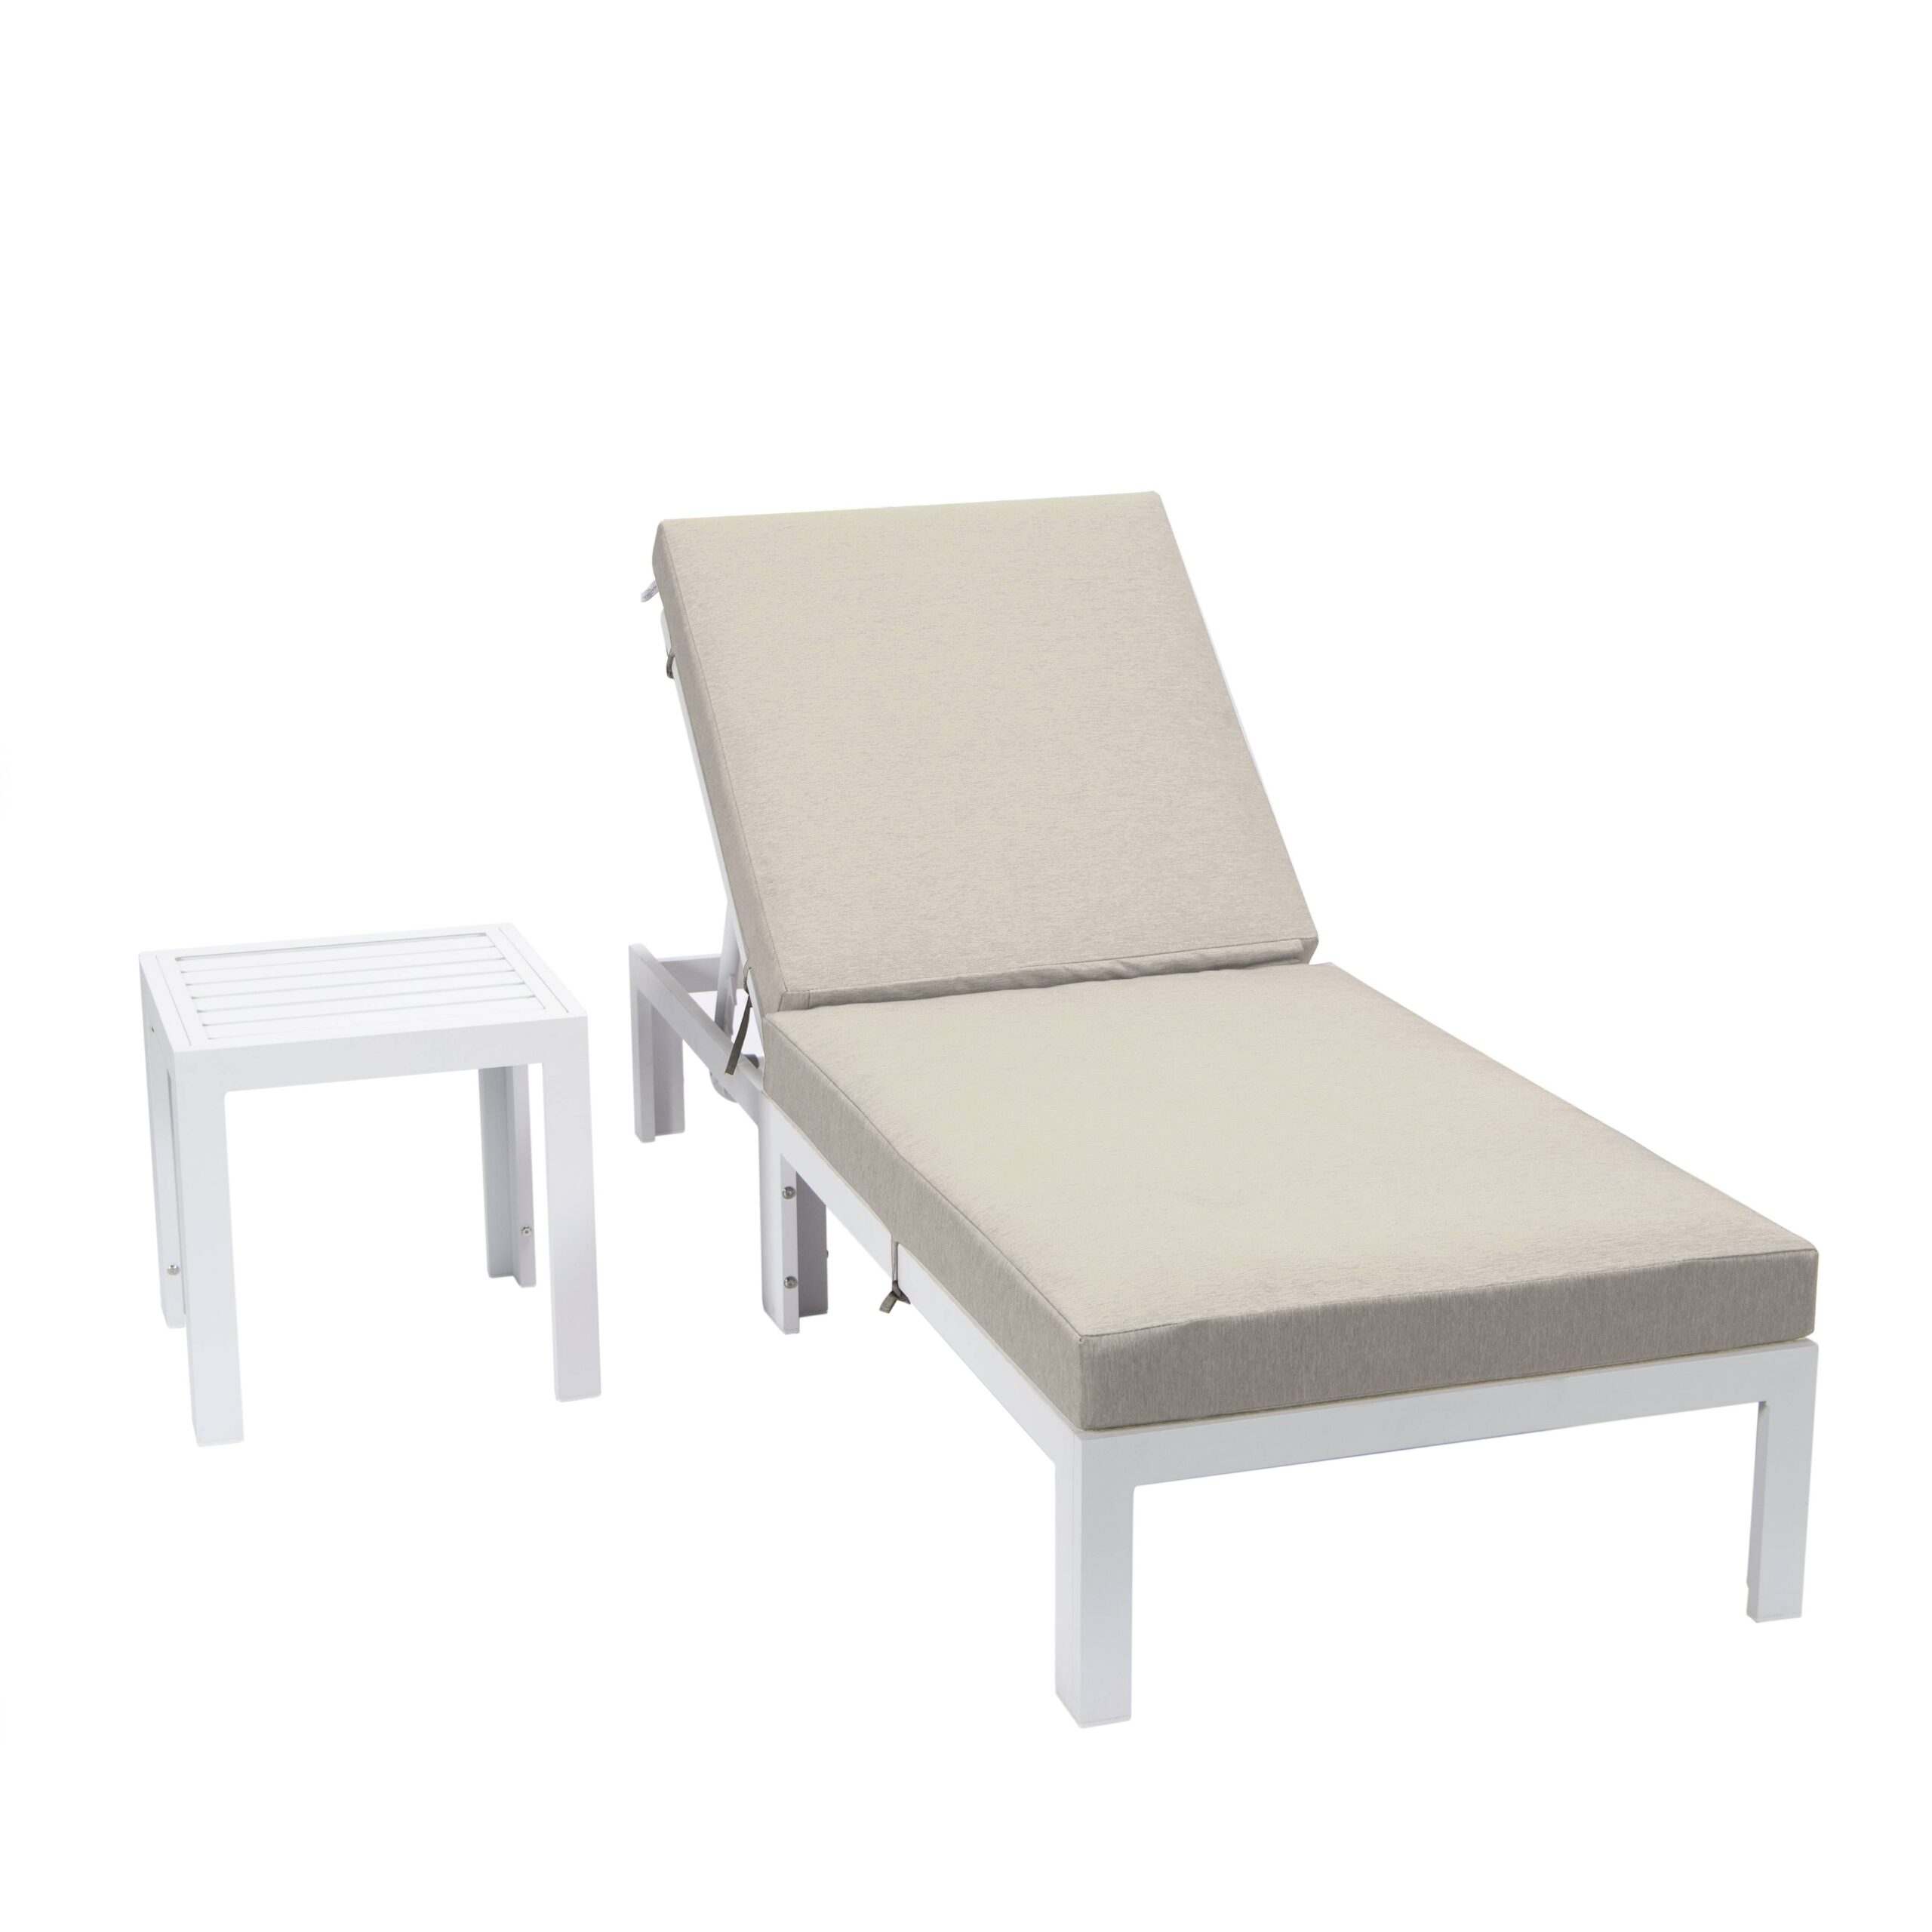 LeisureMod Chelsea Modern Weathered Grey Aluminum Outdoor Chaise Lounge Chair With Side Table & Beige Cushions - image 3 of 13